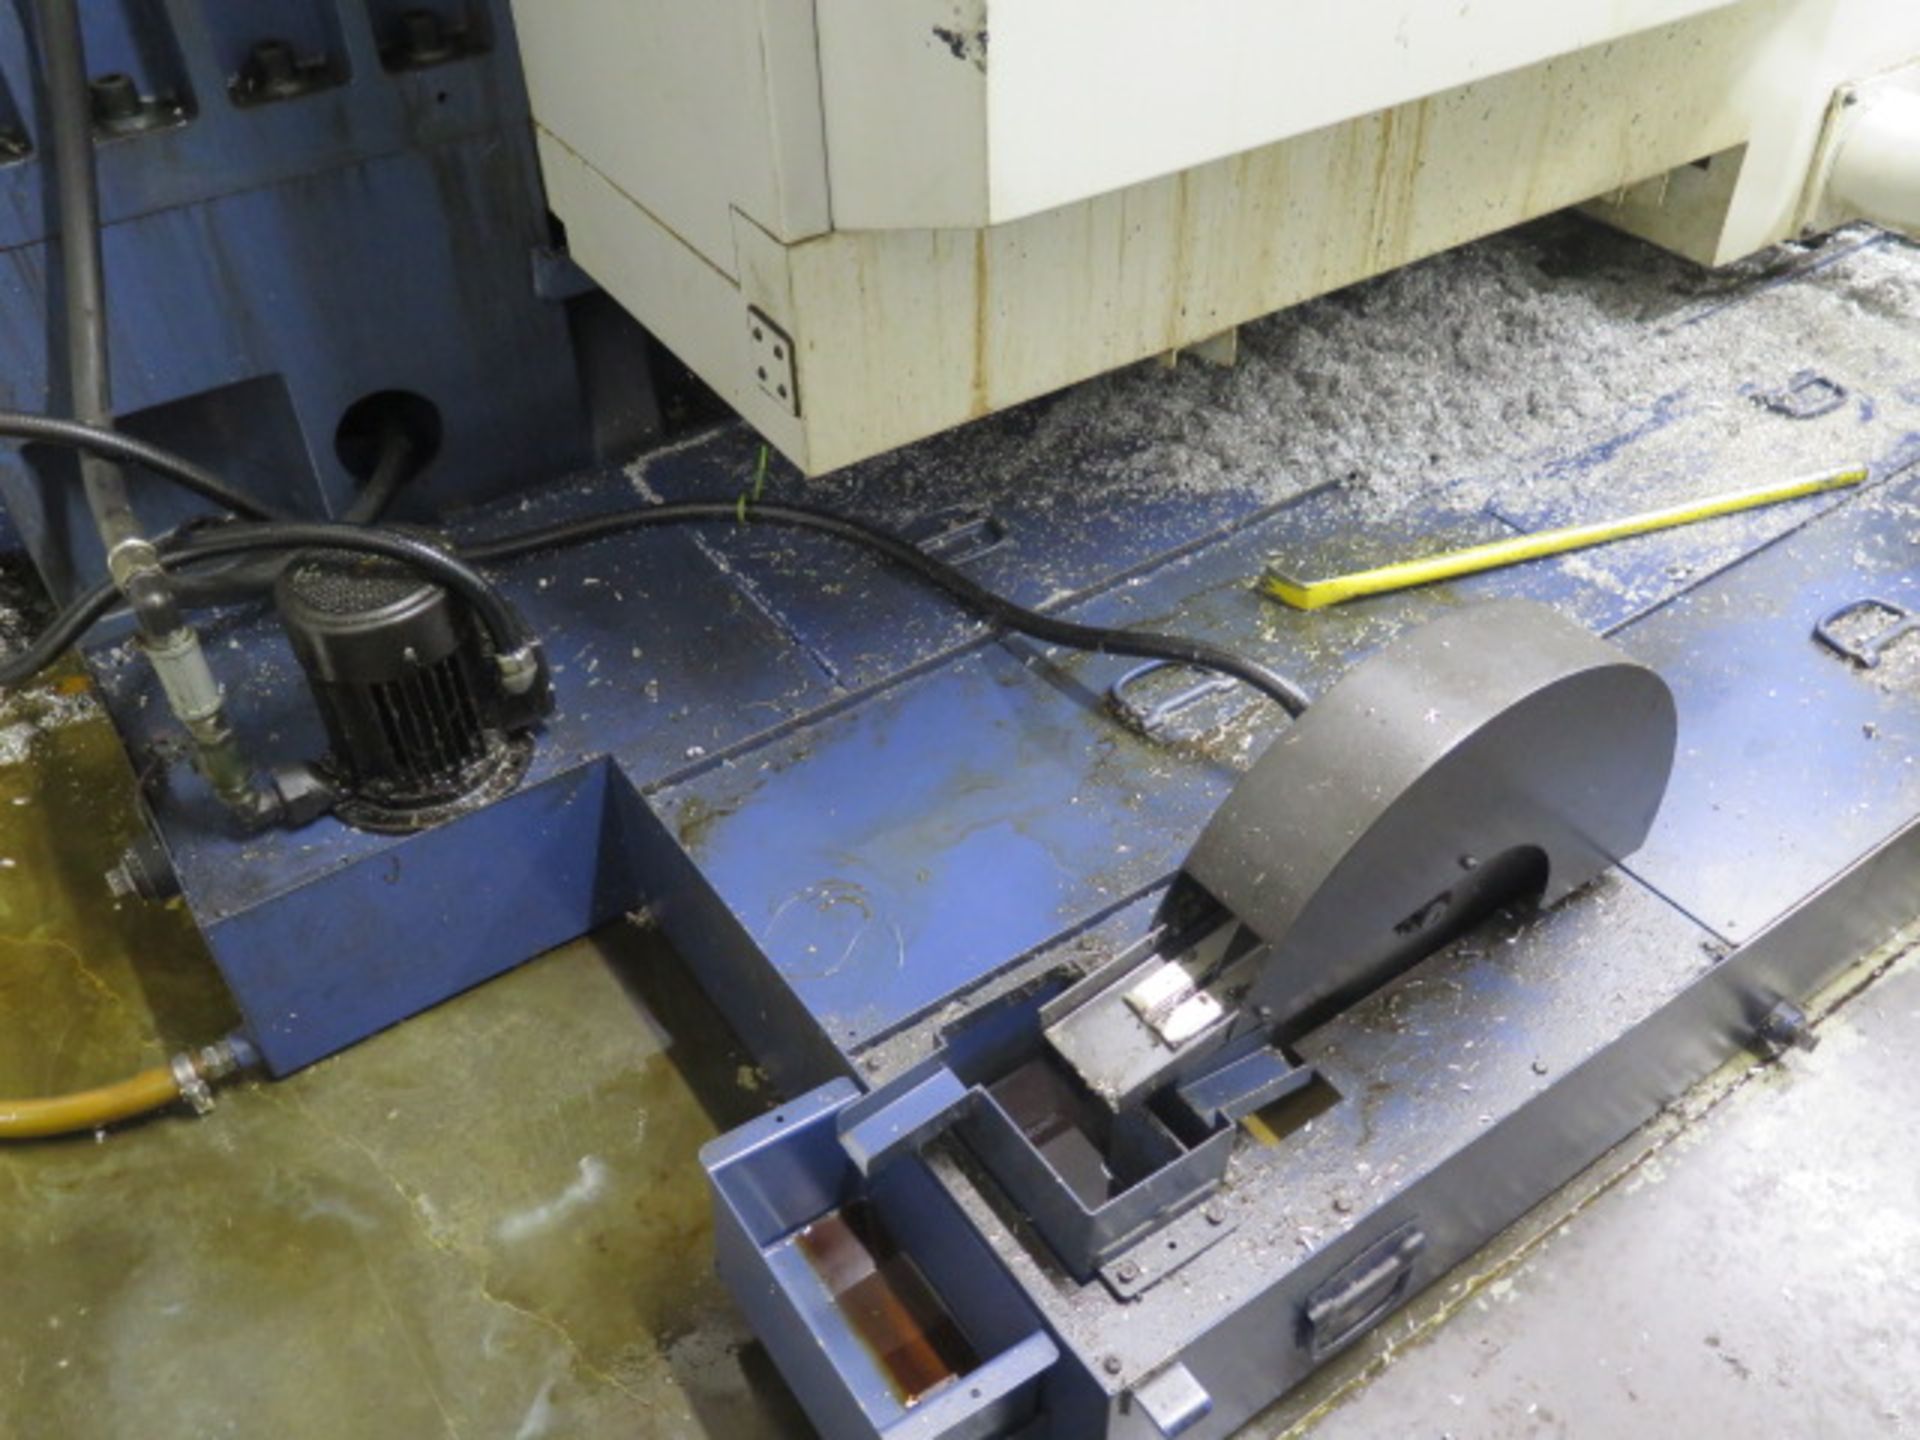 2006 YCM XV-1020A CNC VMC s/n 1129 w/ Fanuc MXP-200i Controls, Hand Wheel, SOLD AS IS - Image 19 of 20